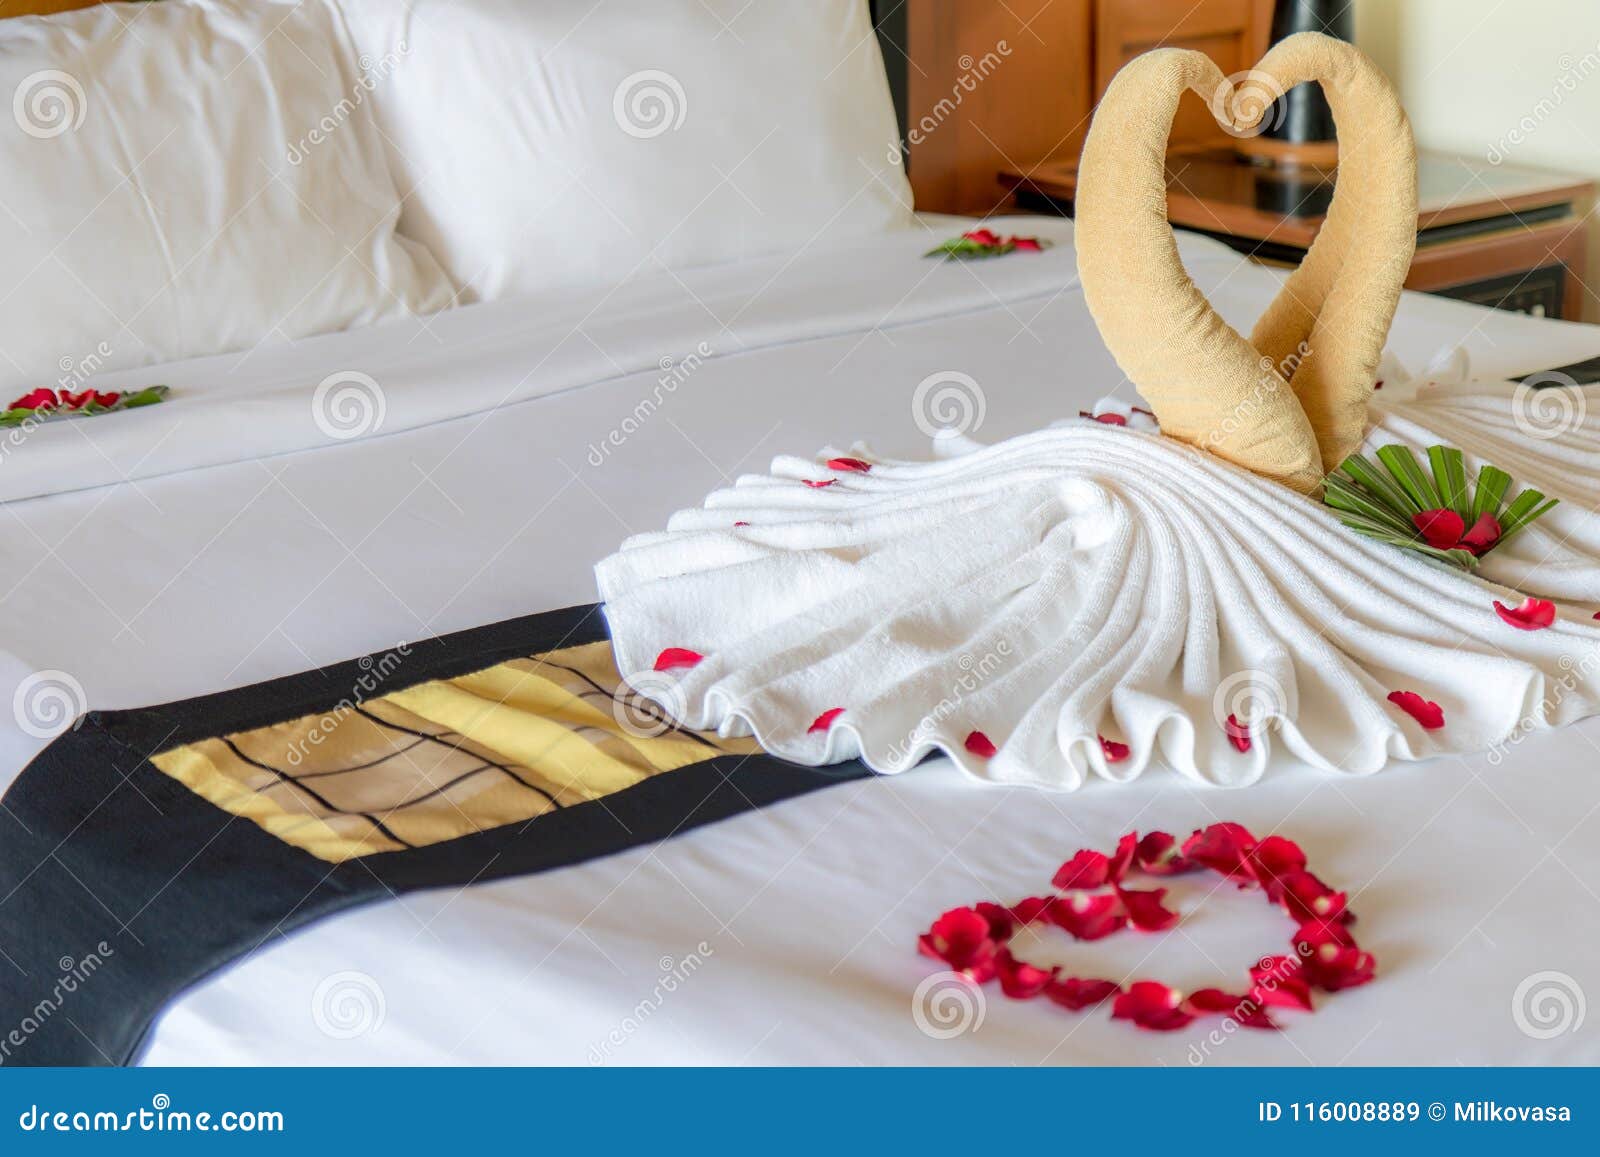 Towel As Birds Decoration with Red Rose Petals Stock Image - Image ...